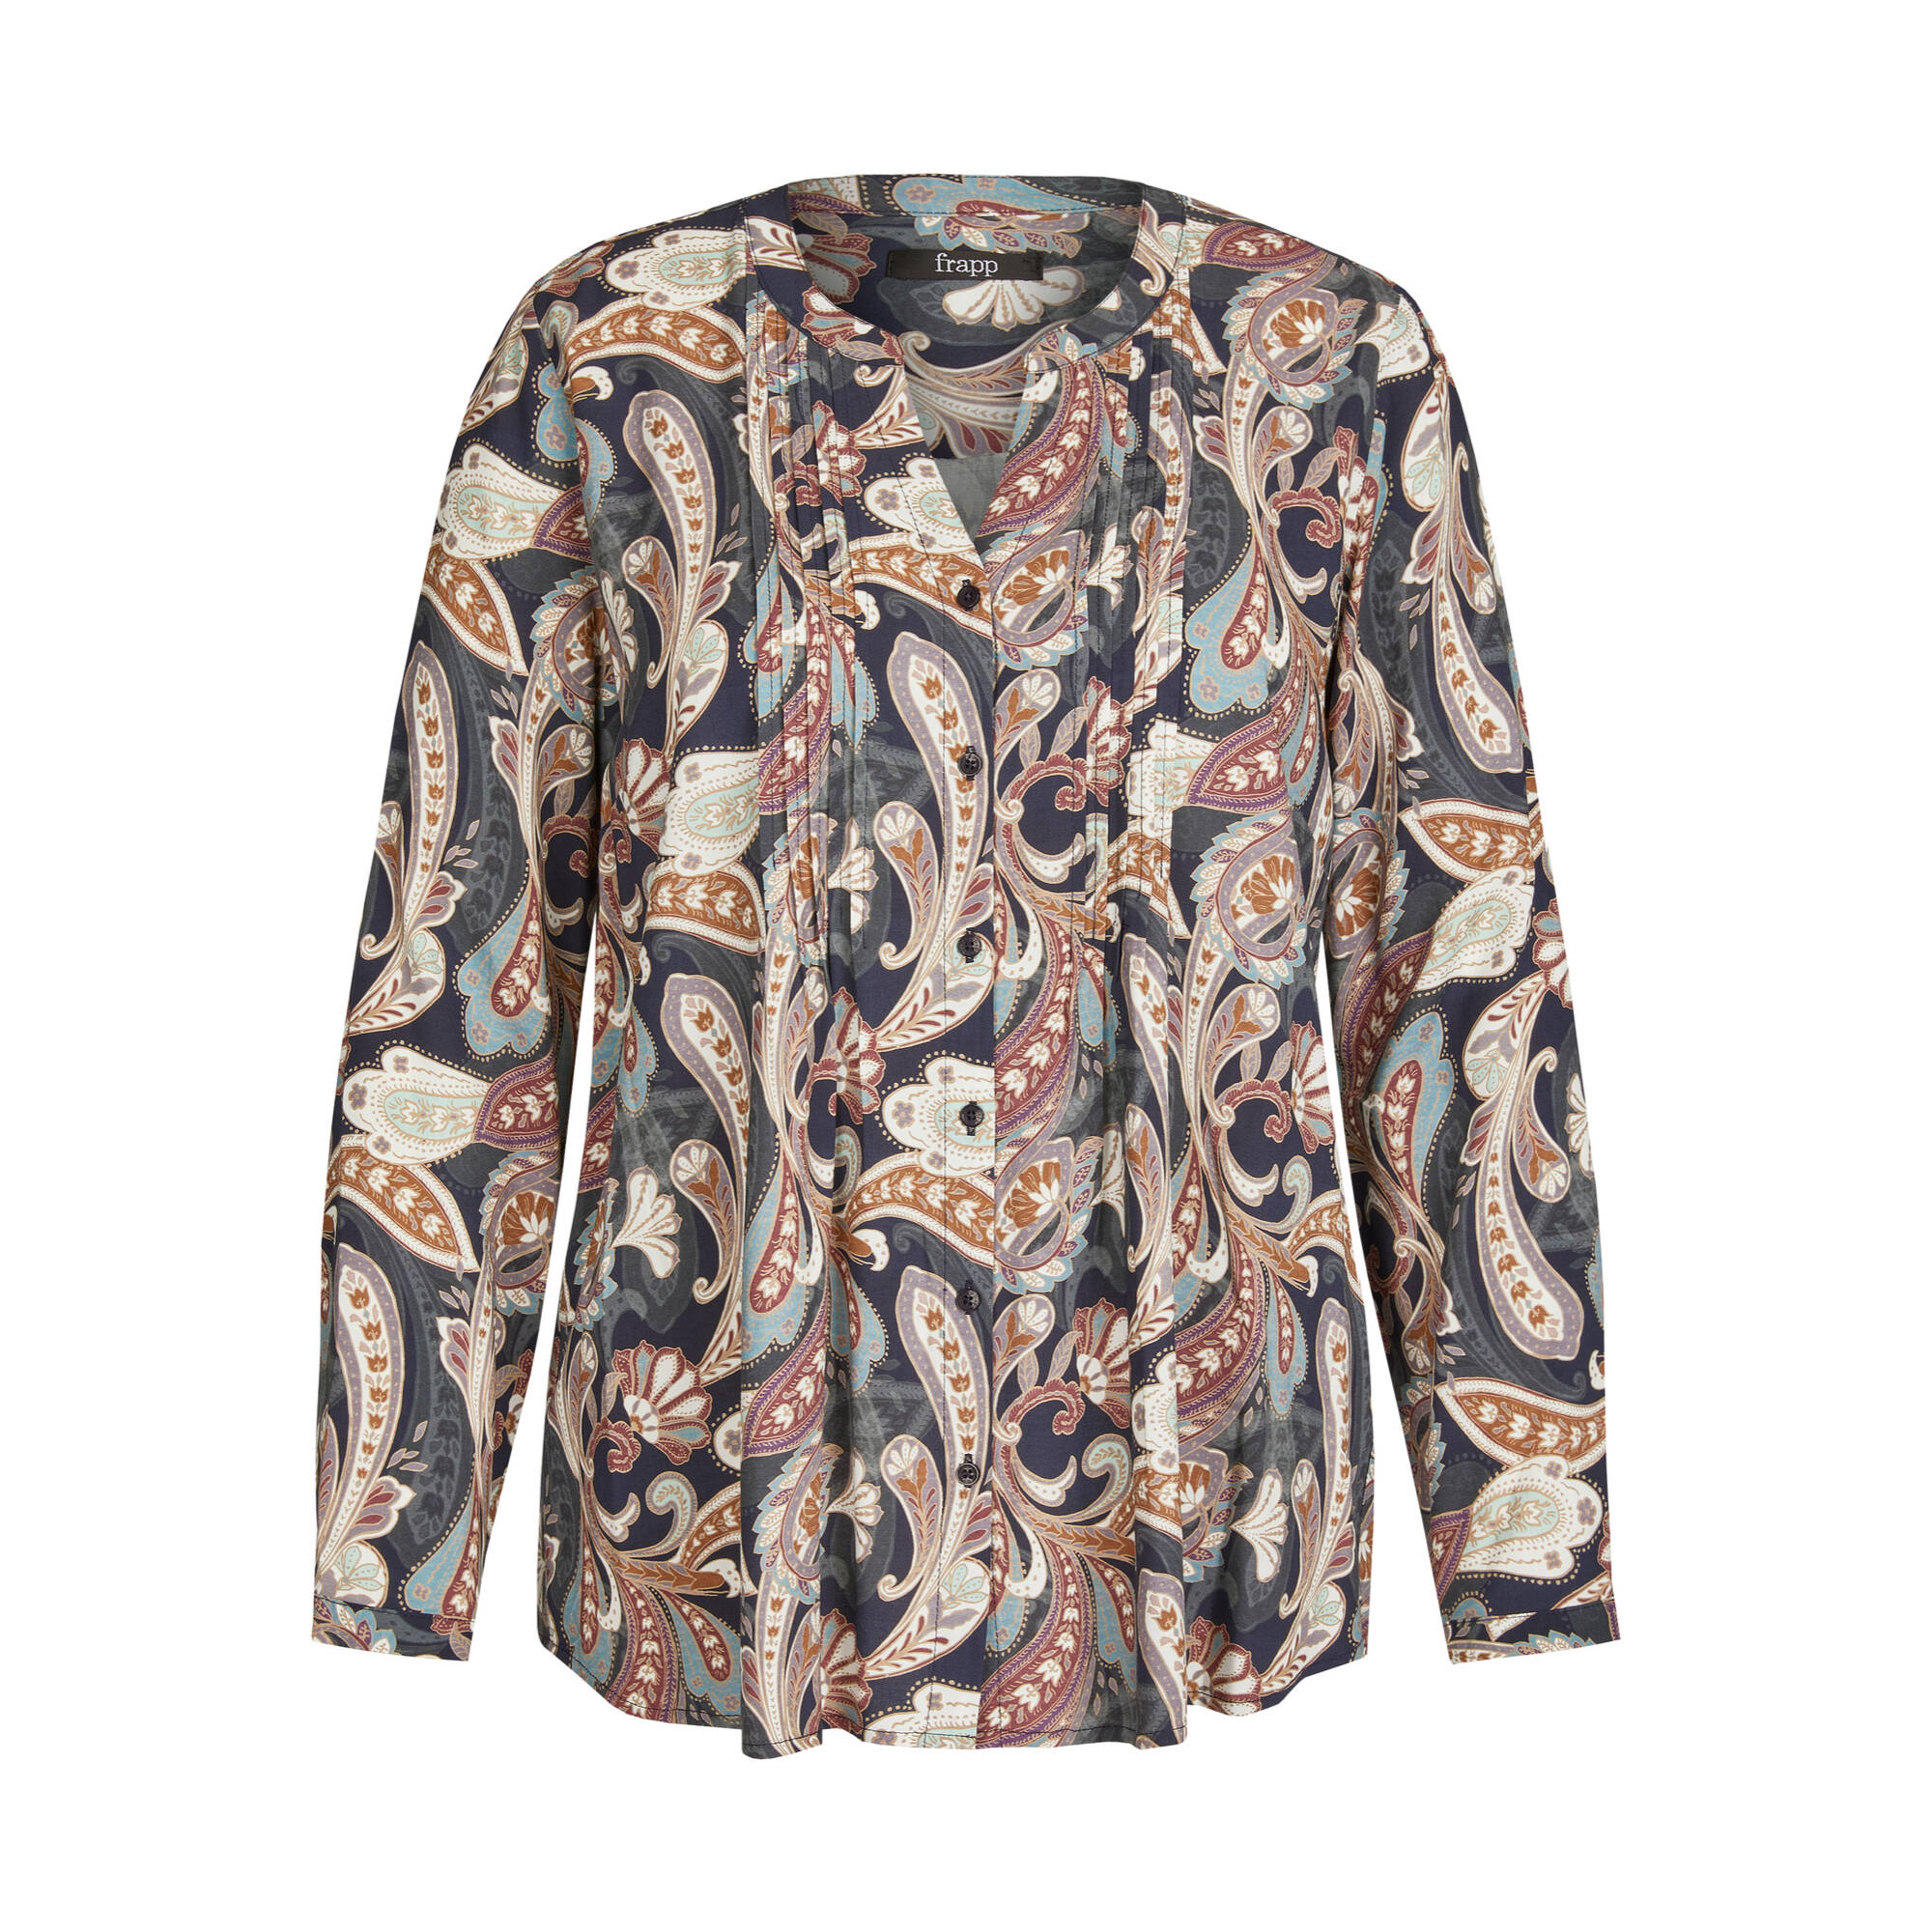 Bedruckte Bluse mit Paisley-Muster